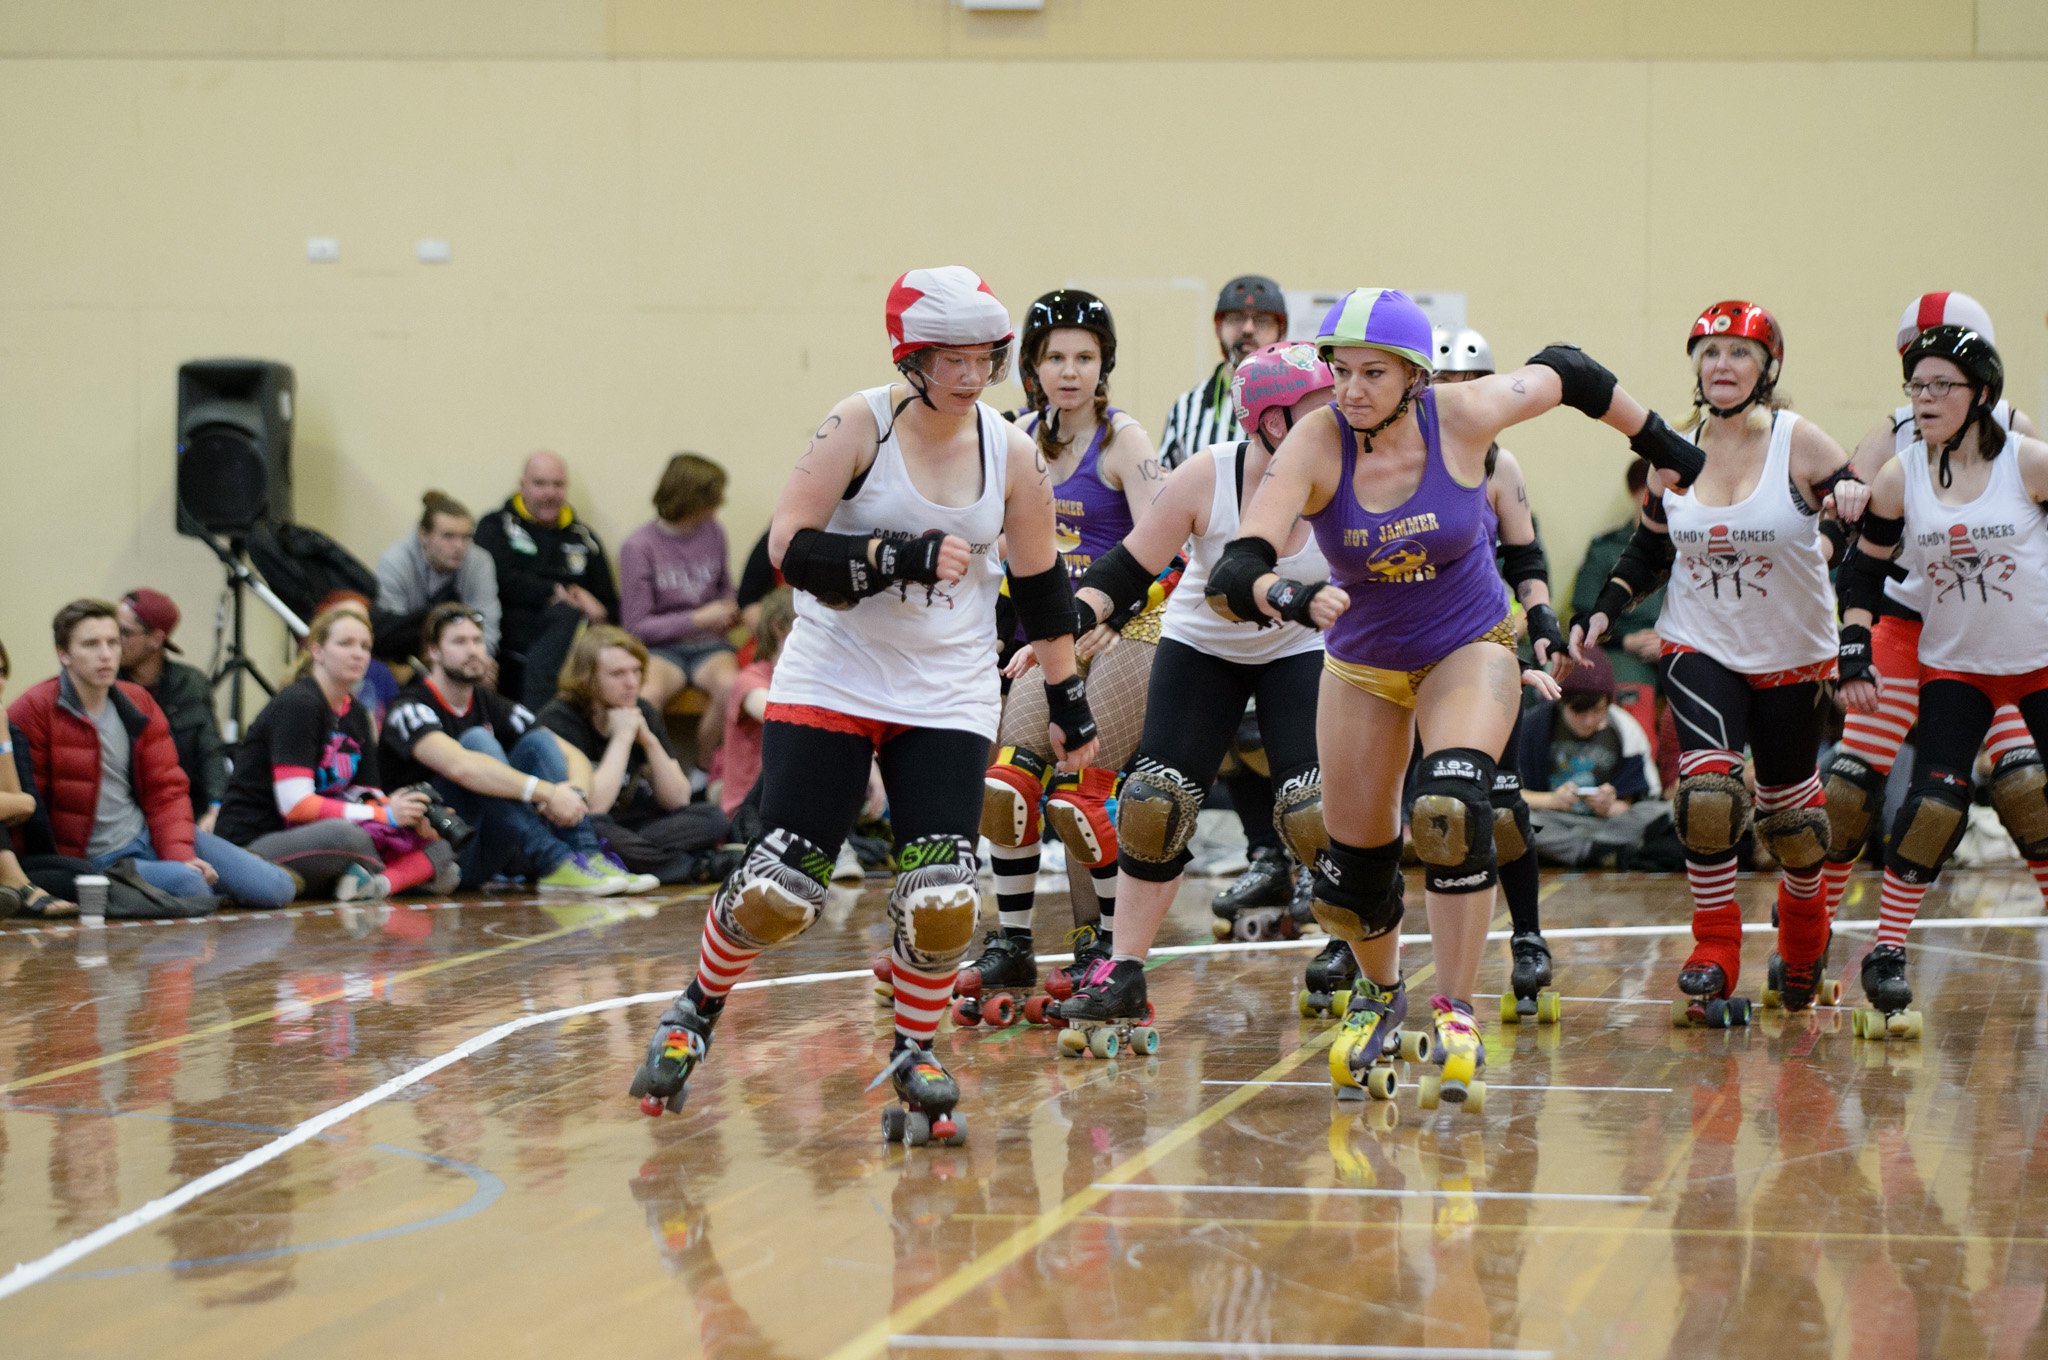 Hot Jammer Donuts v Candy Caners. Photographer: Brett Sargeant, D-eye Photography